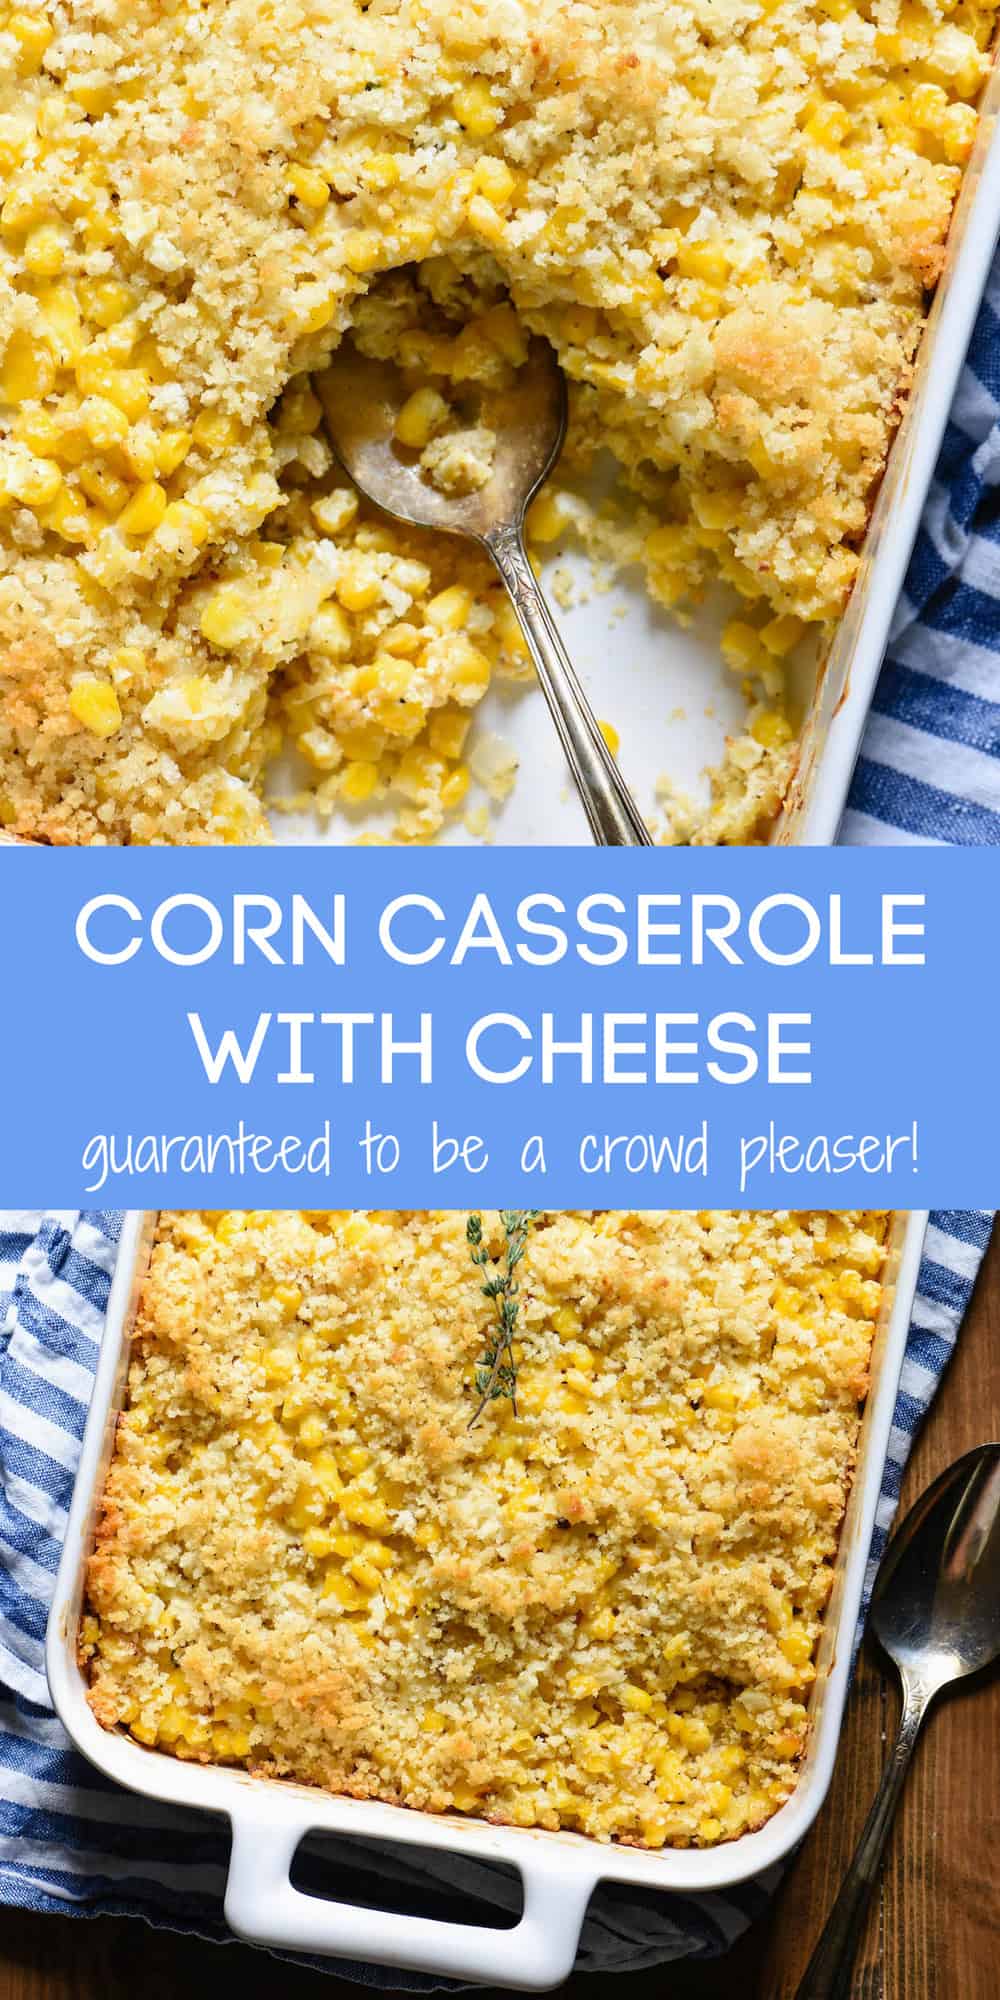 Collage of two images of corn casserole with overlay that says "Corn Casserole With Cheese. Guaranteed to be a crowd pleaser!"